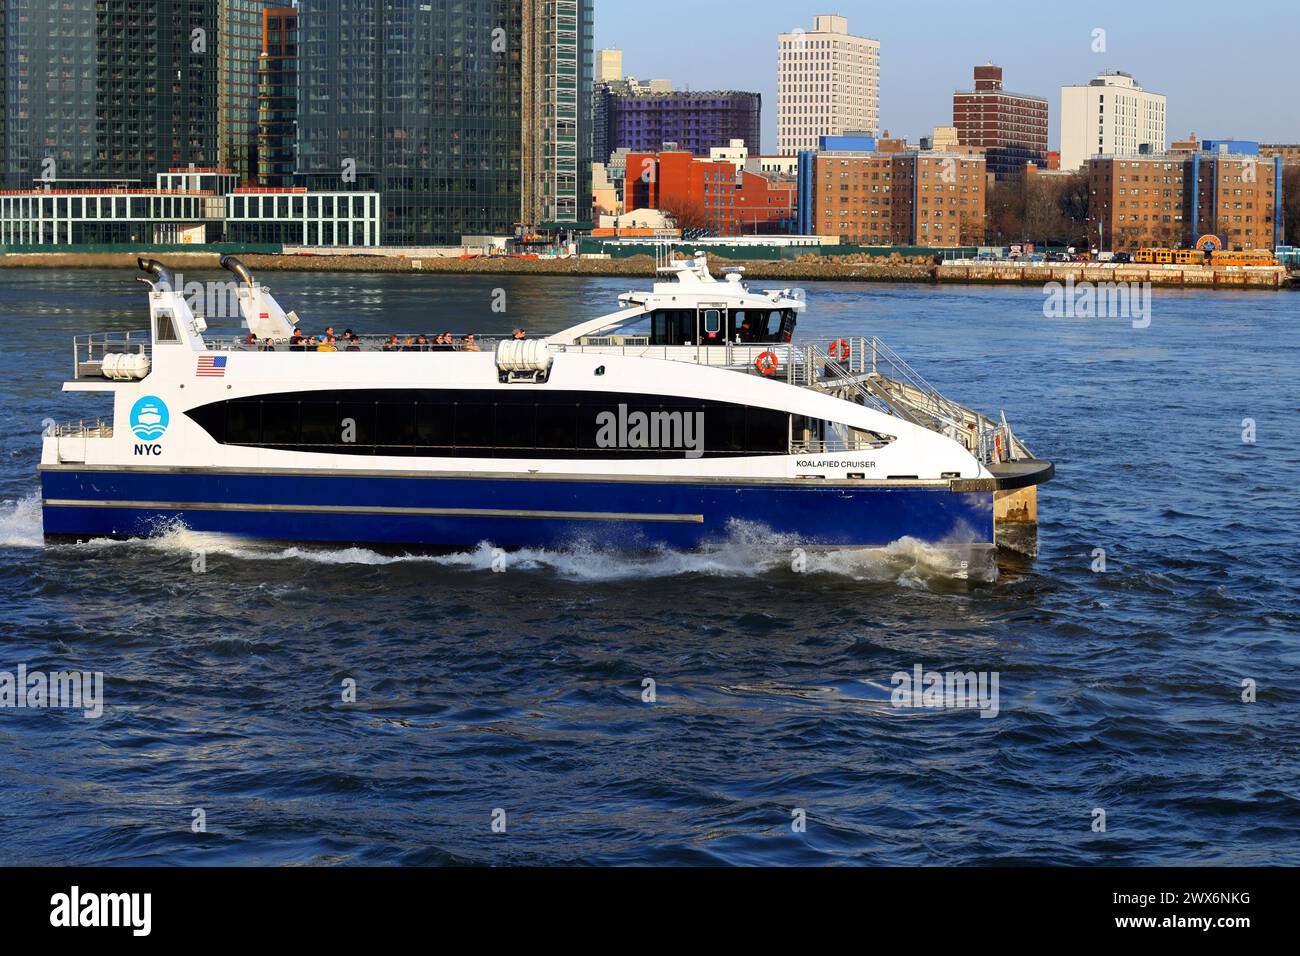 NYC Ferry ferryboat Koalafied Cruiser on the East River, New York City. NYC Ferry is operated by Hornblower Cruises with subsidies from the city. Stock Photo